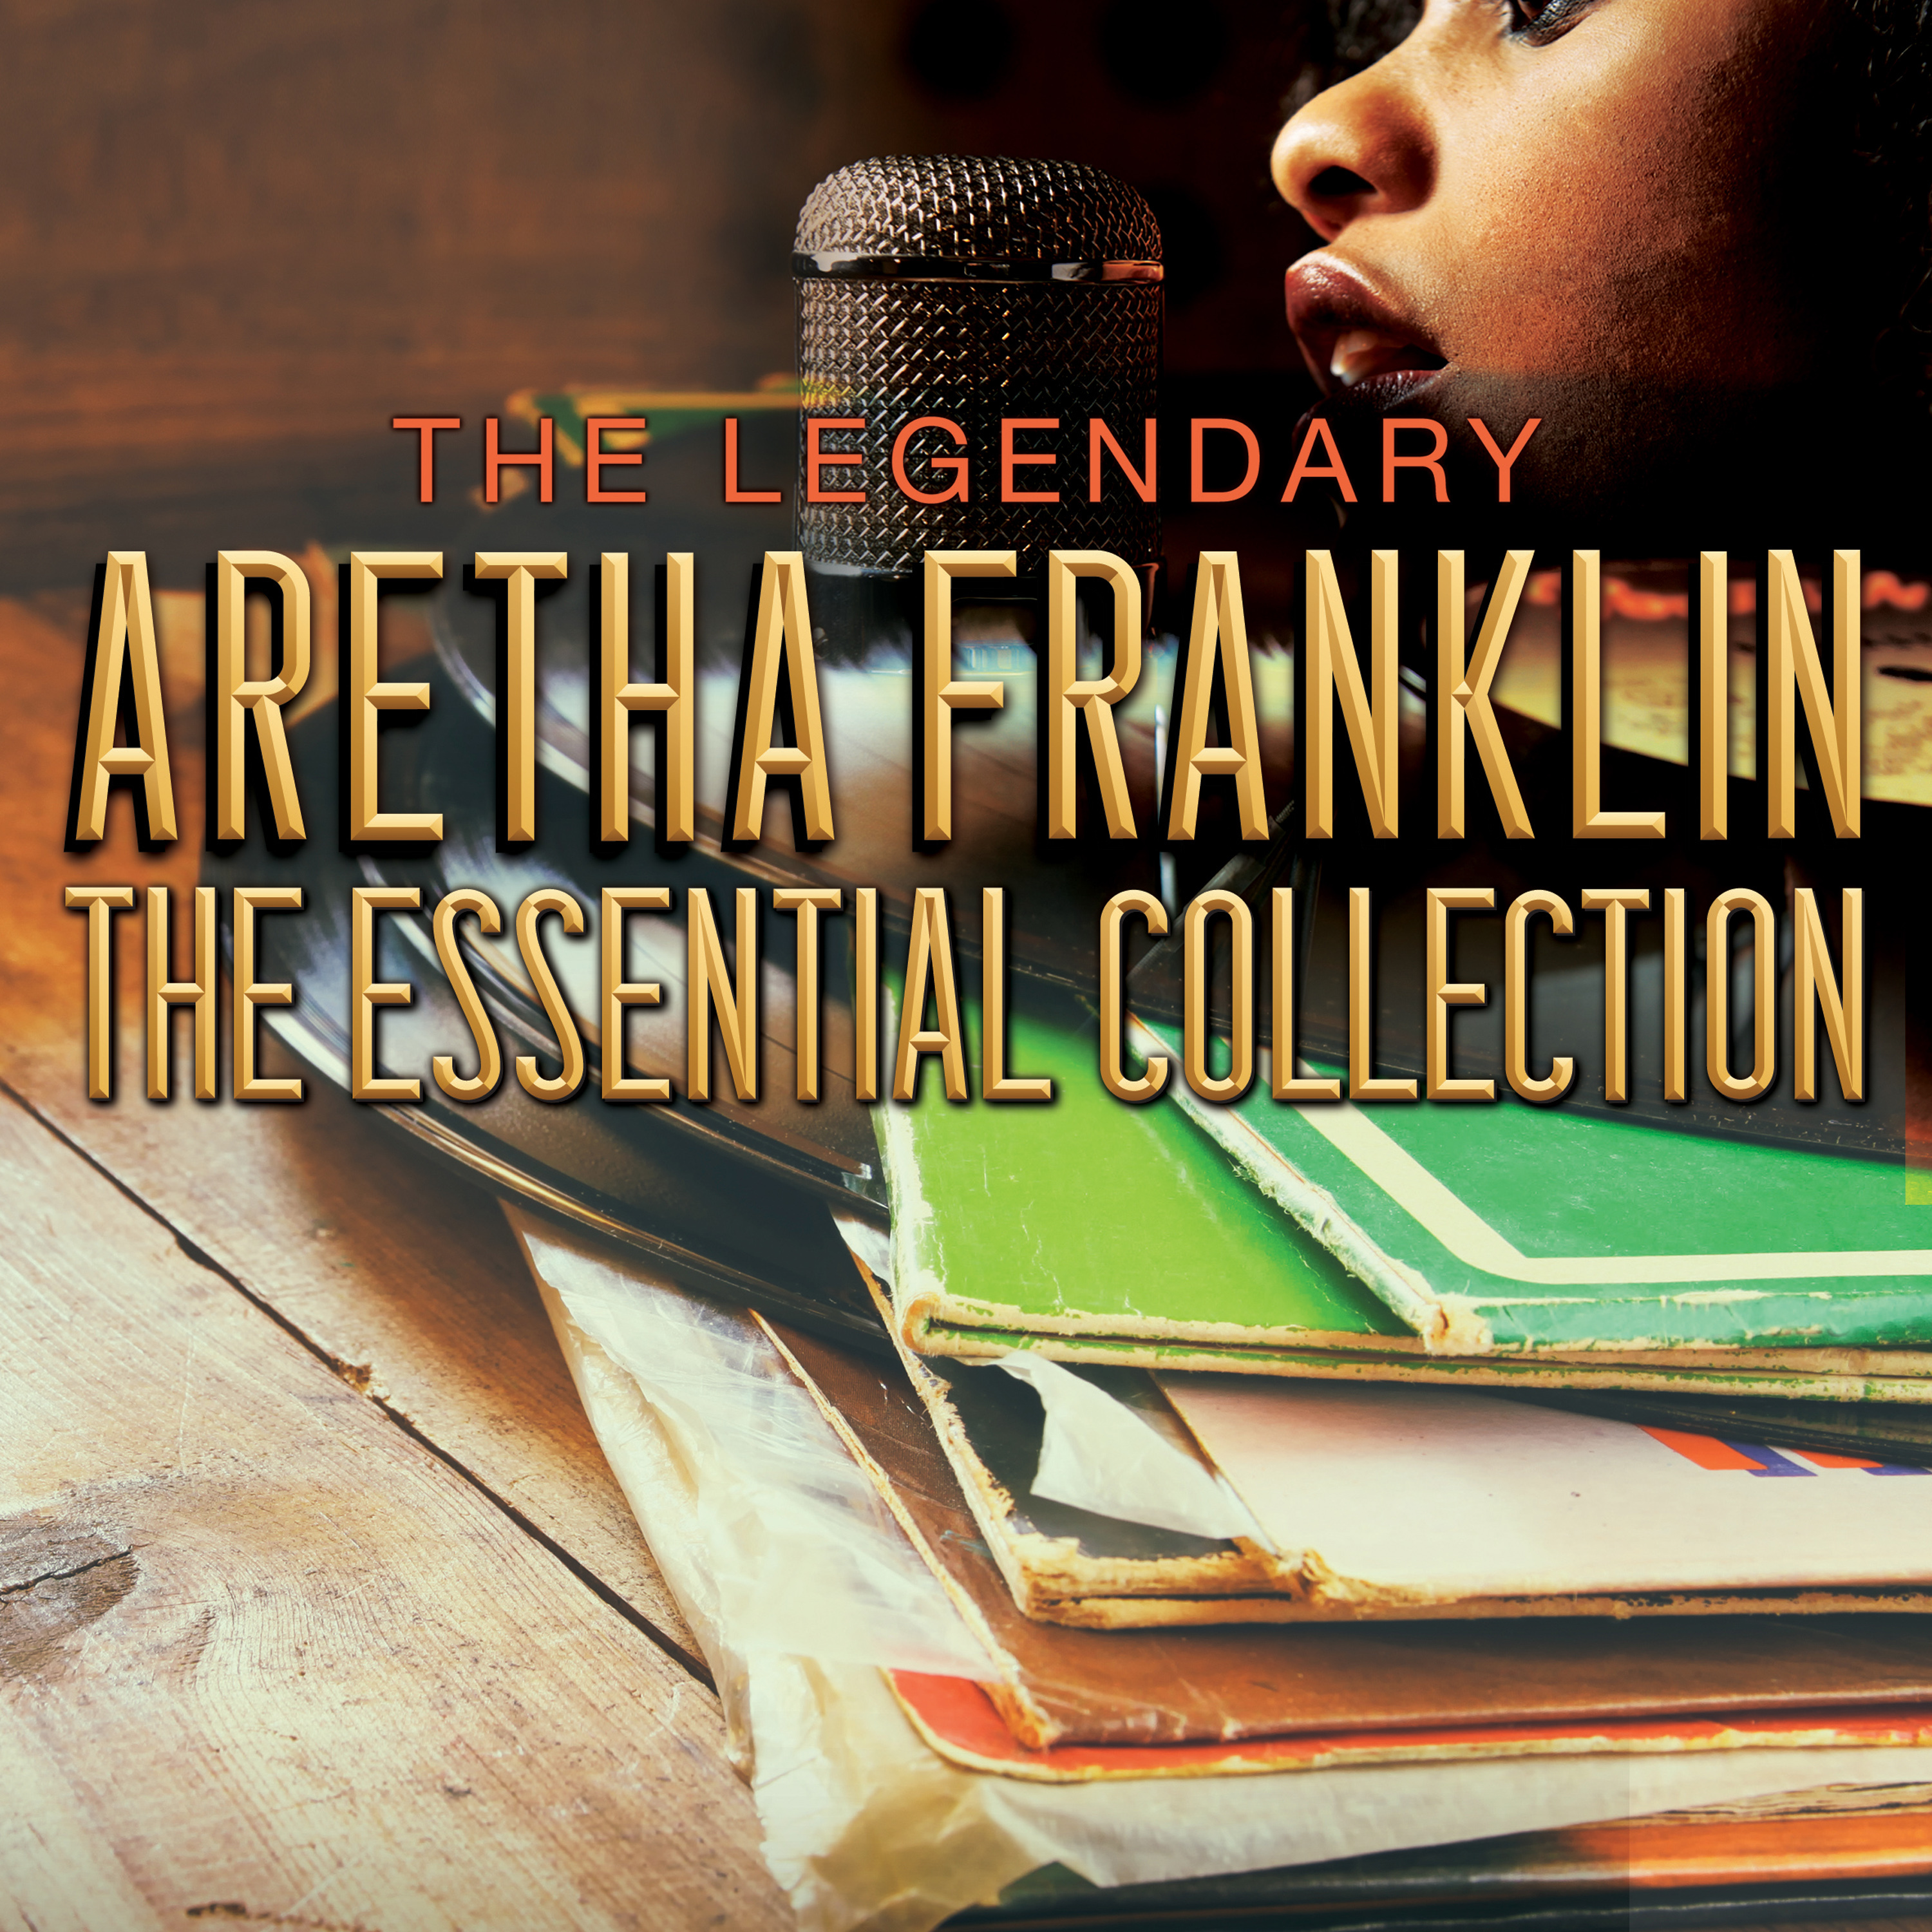 THE LEGENDARY ARETHA FRANKLIN - The Essential Collection